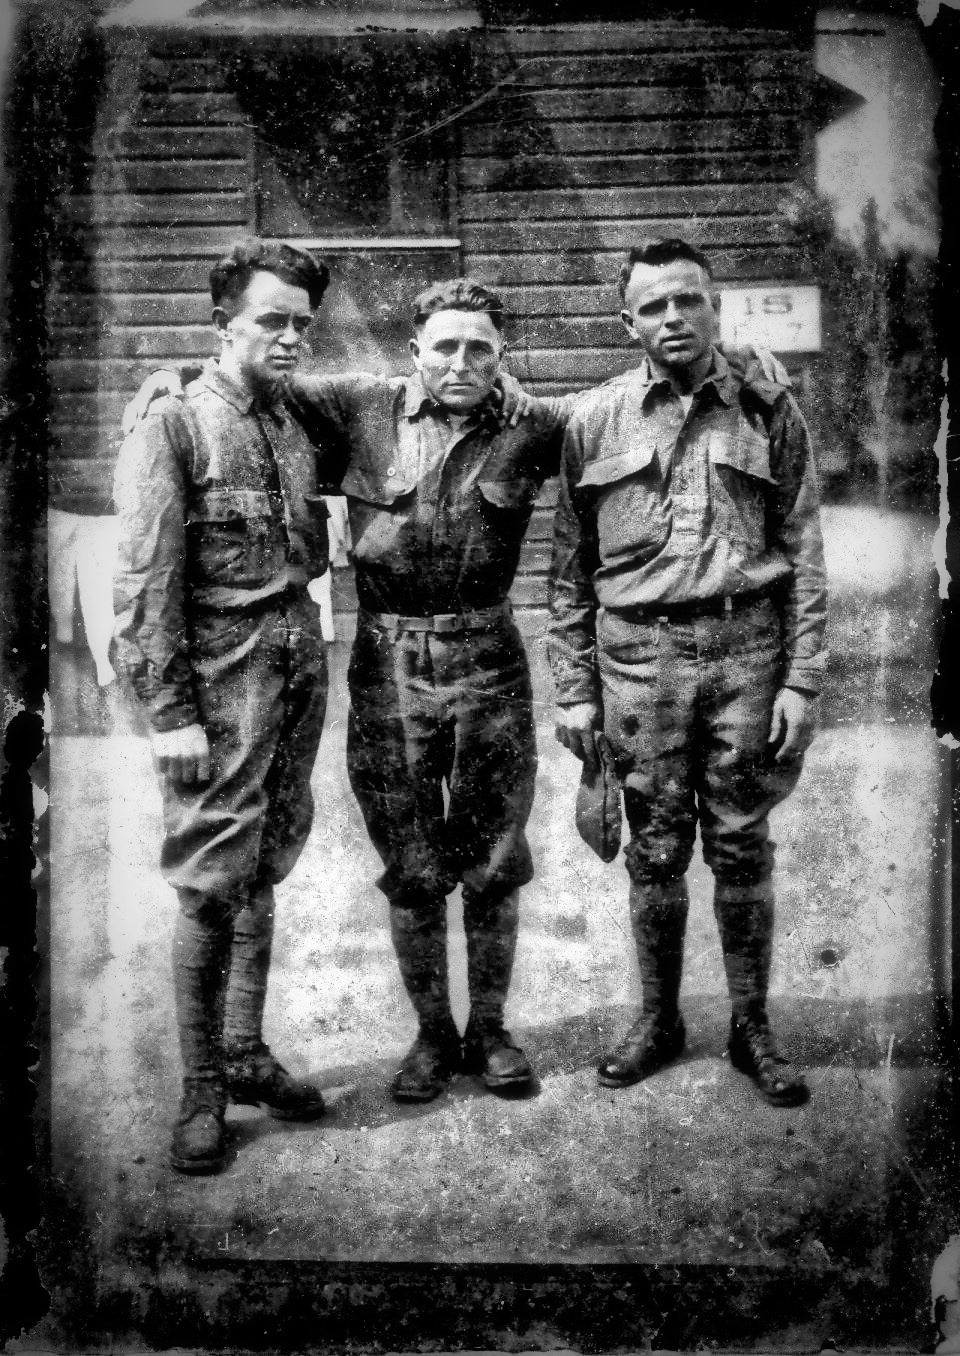 This image of my maternal grandfather Leo C. Ziv (1890-1971) [center] was probably taken during his training at Fort Dix, New Jersey. As part of the American Expeditionary Force the following year, his lungs were burned by a cloud of mustard gas floating into his trench. He had to expectorate into a paper sack for the remaining 53 years of his life. View full size.